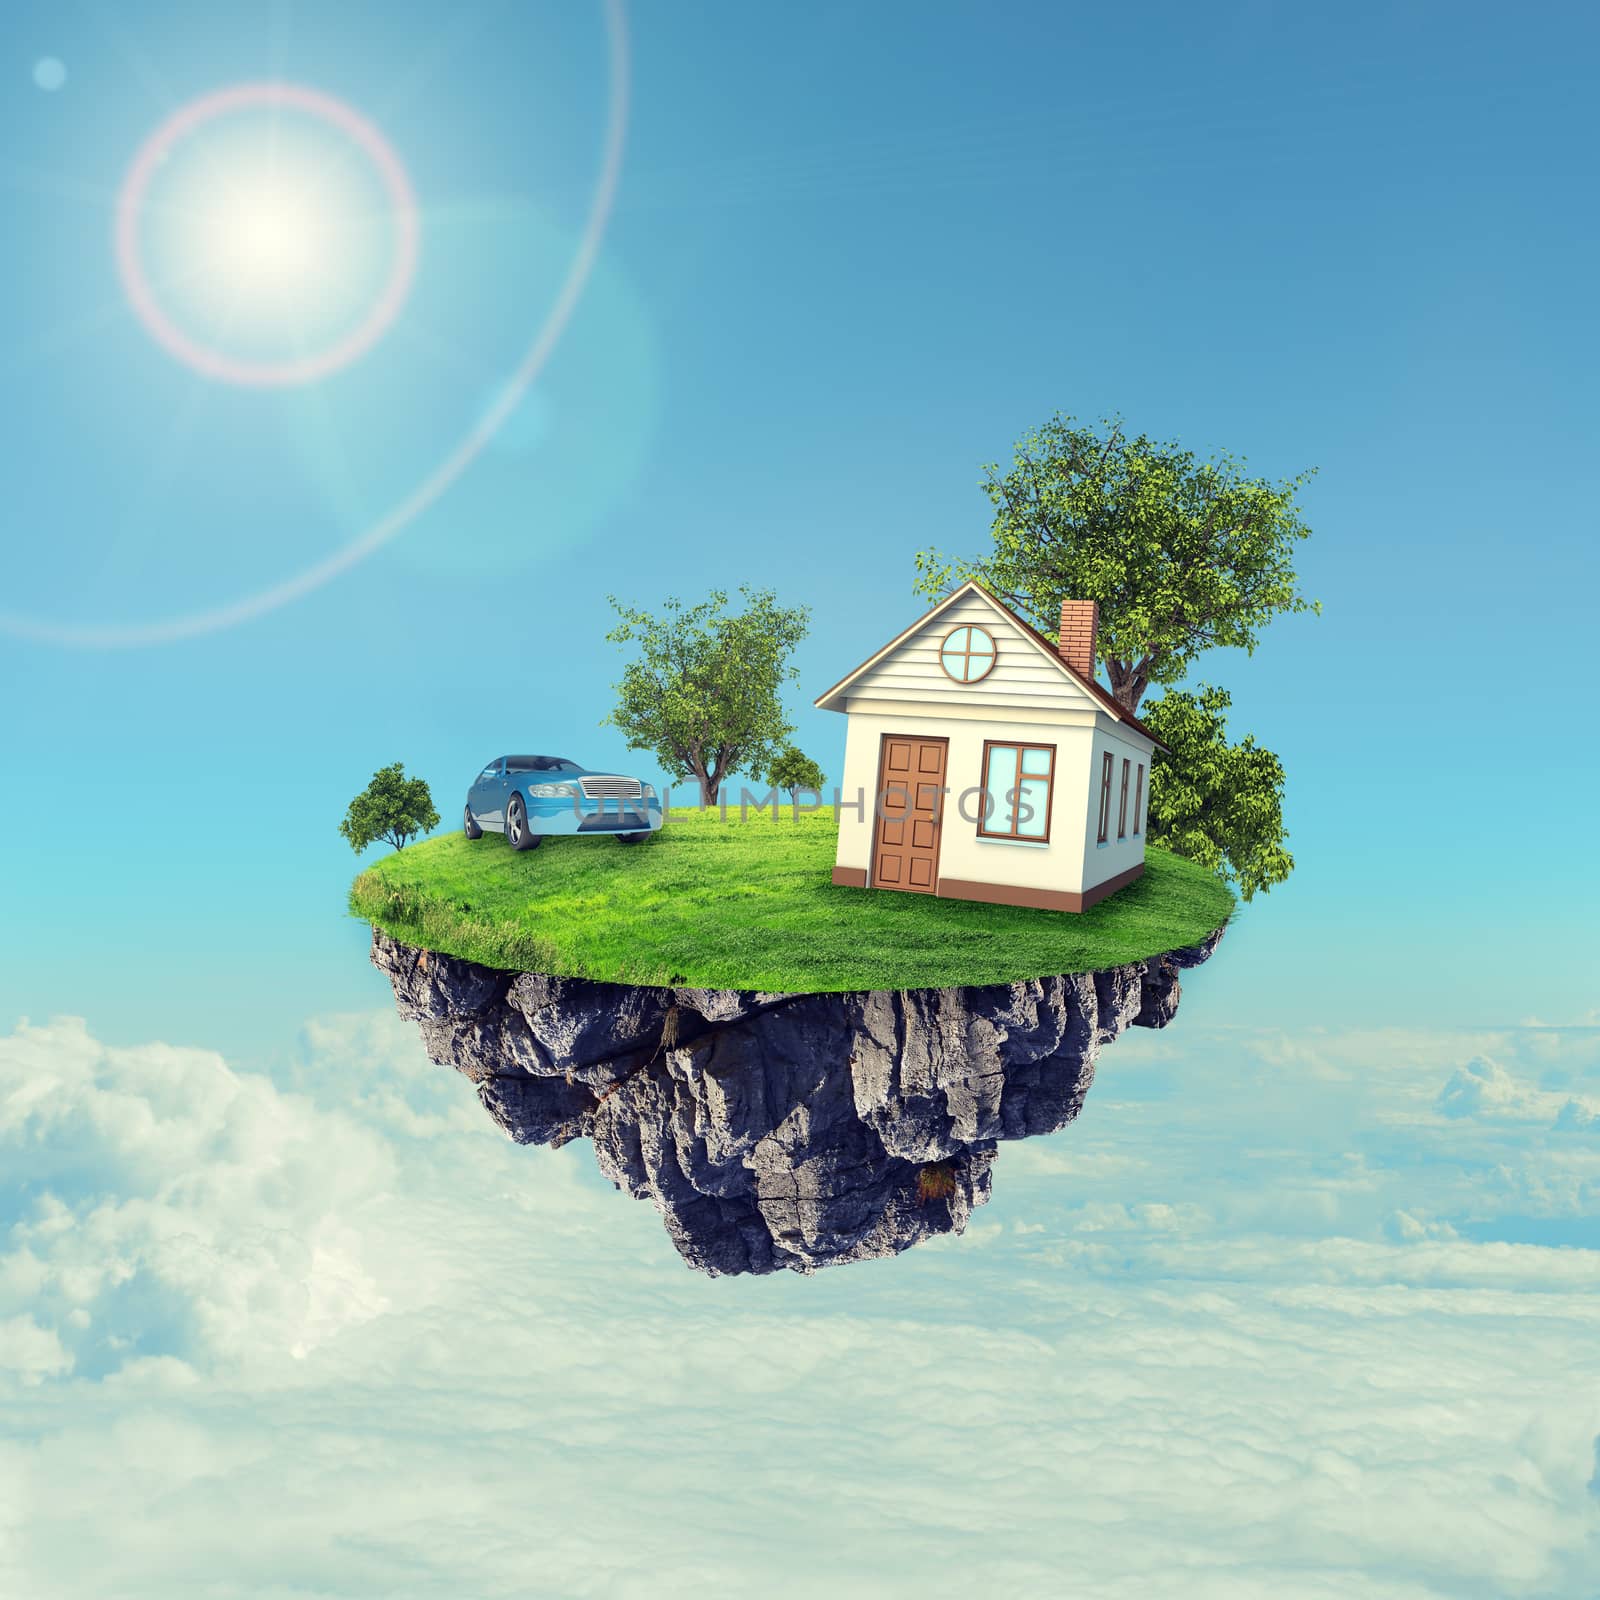 White house with brown roof and car on island in sky with clouds and sun